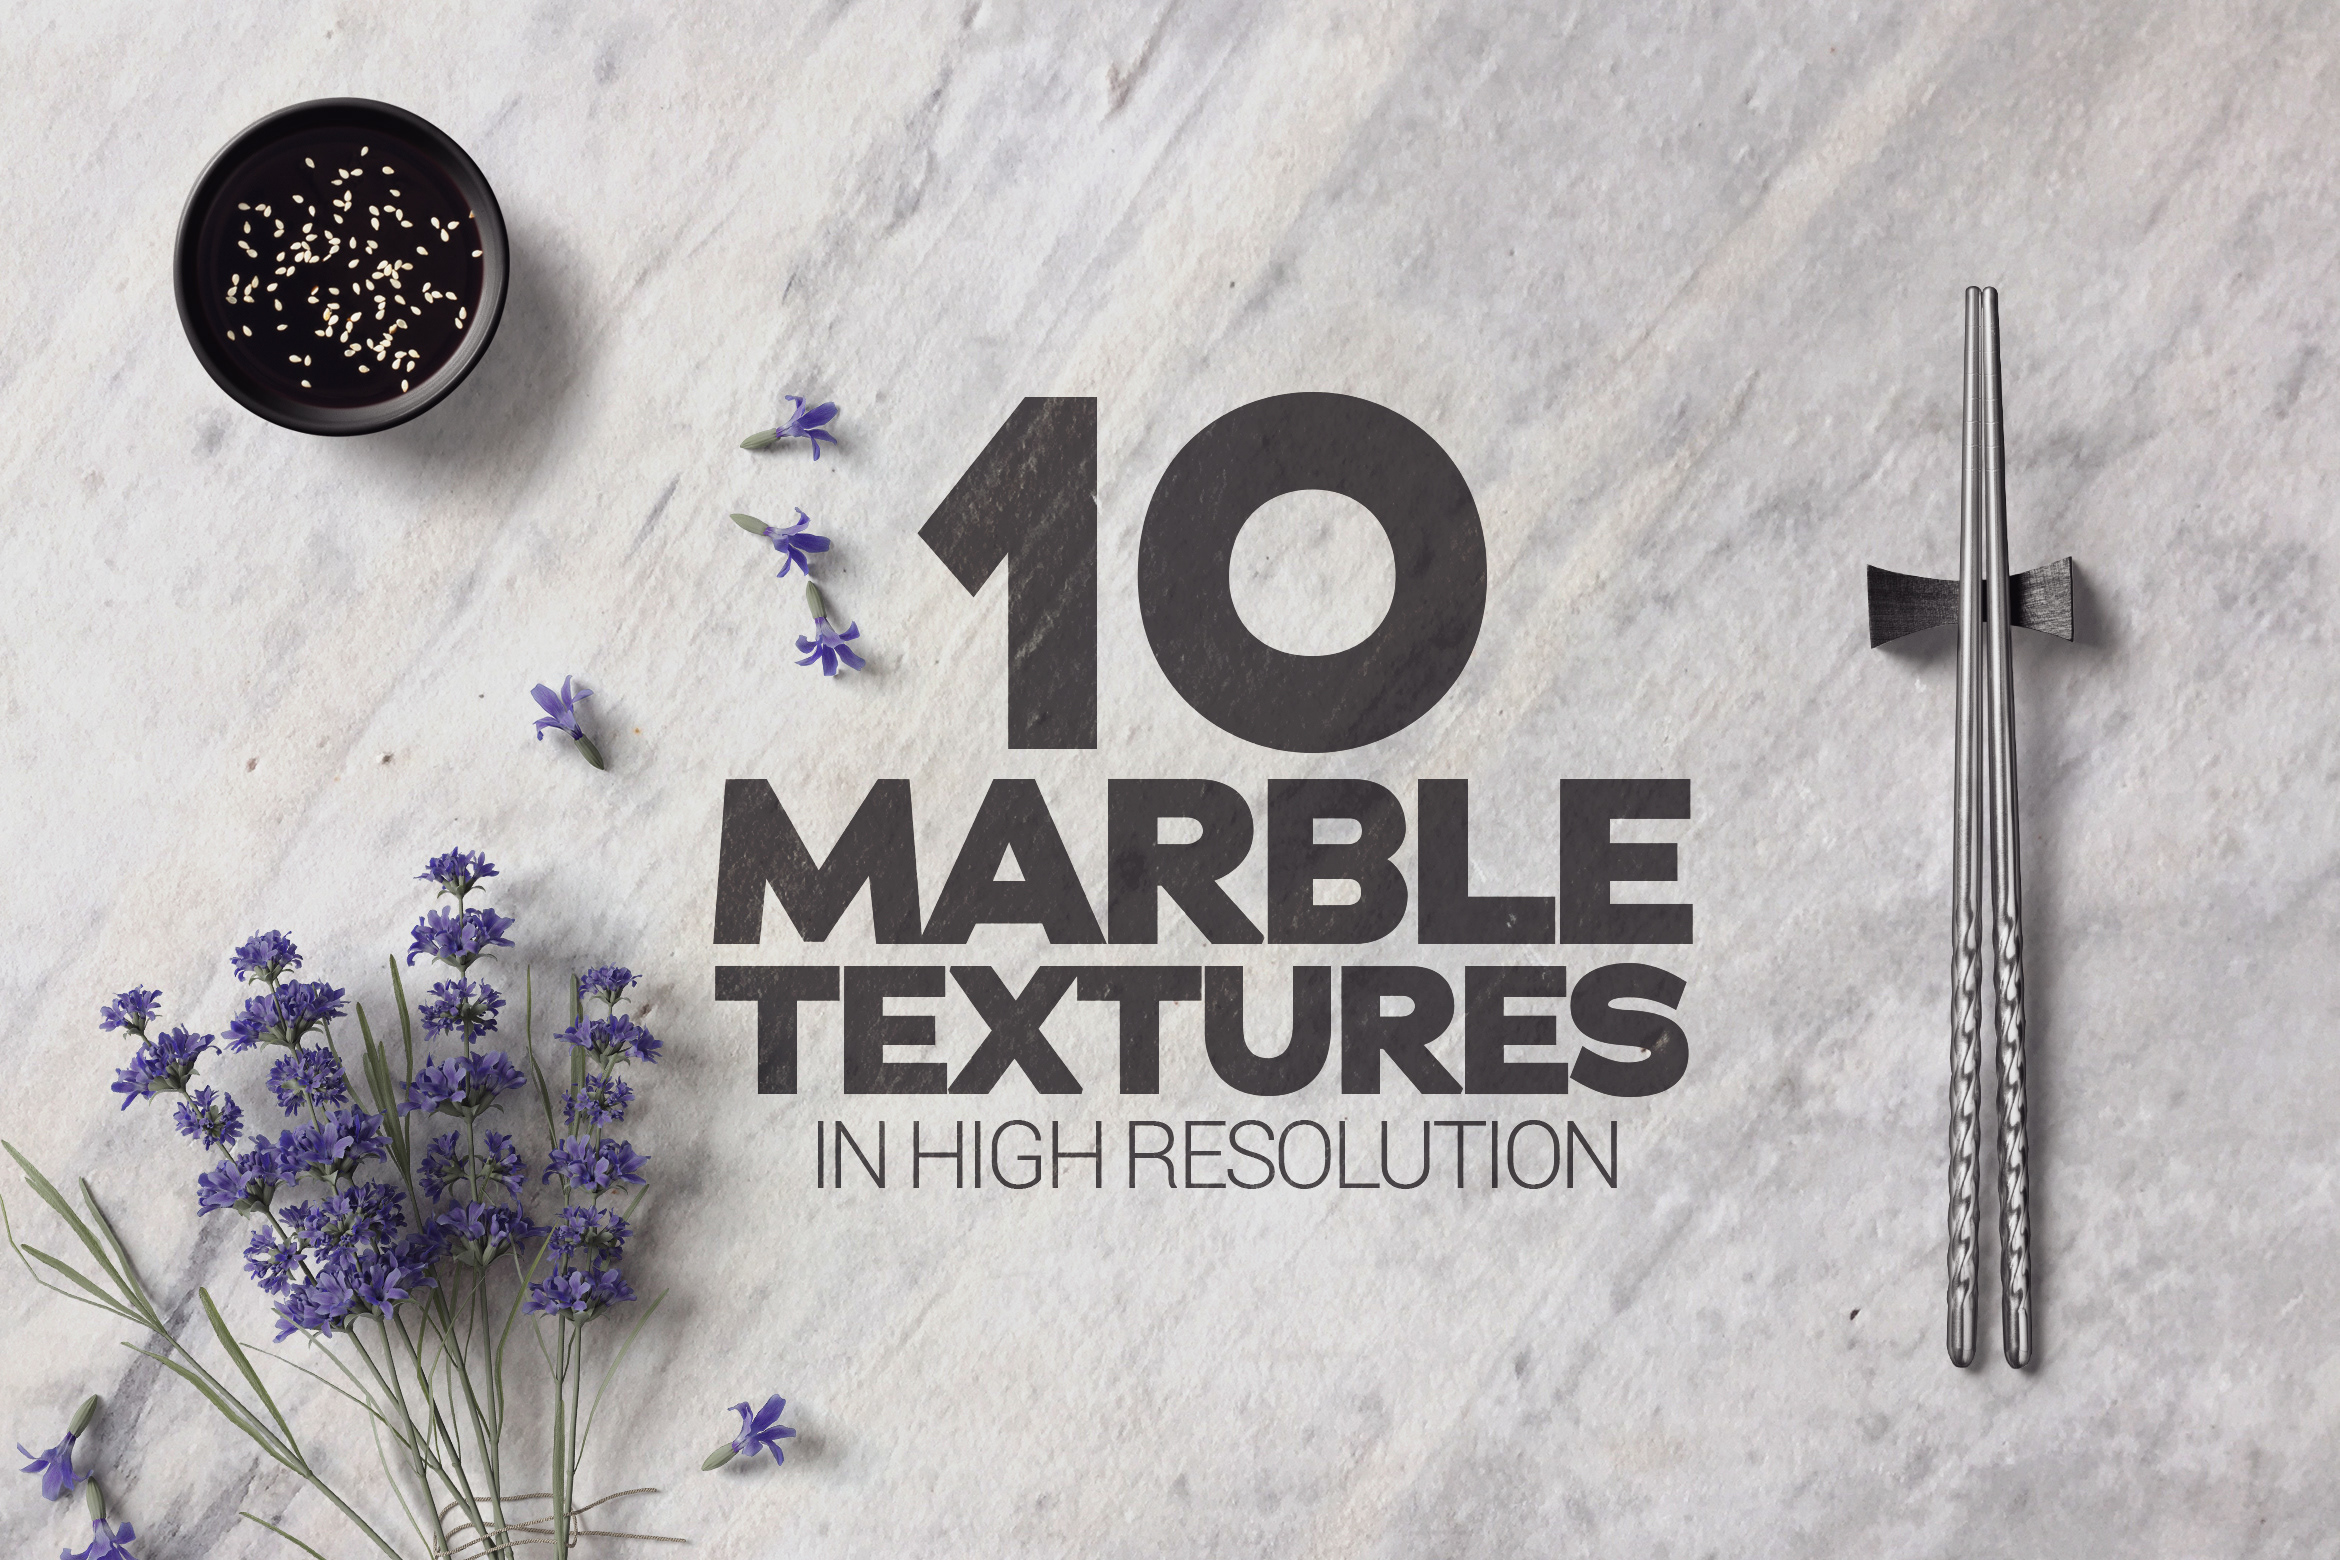 Marble Textures rendition image